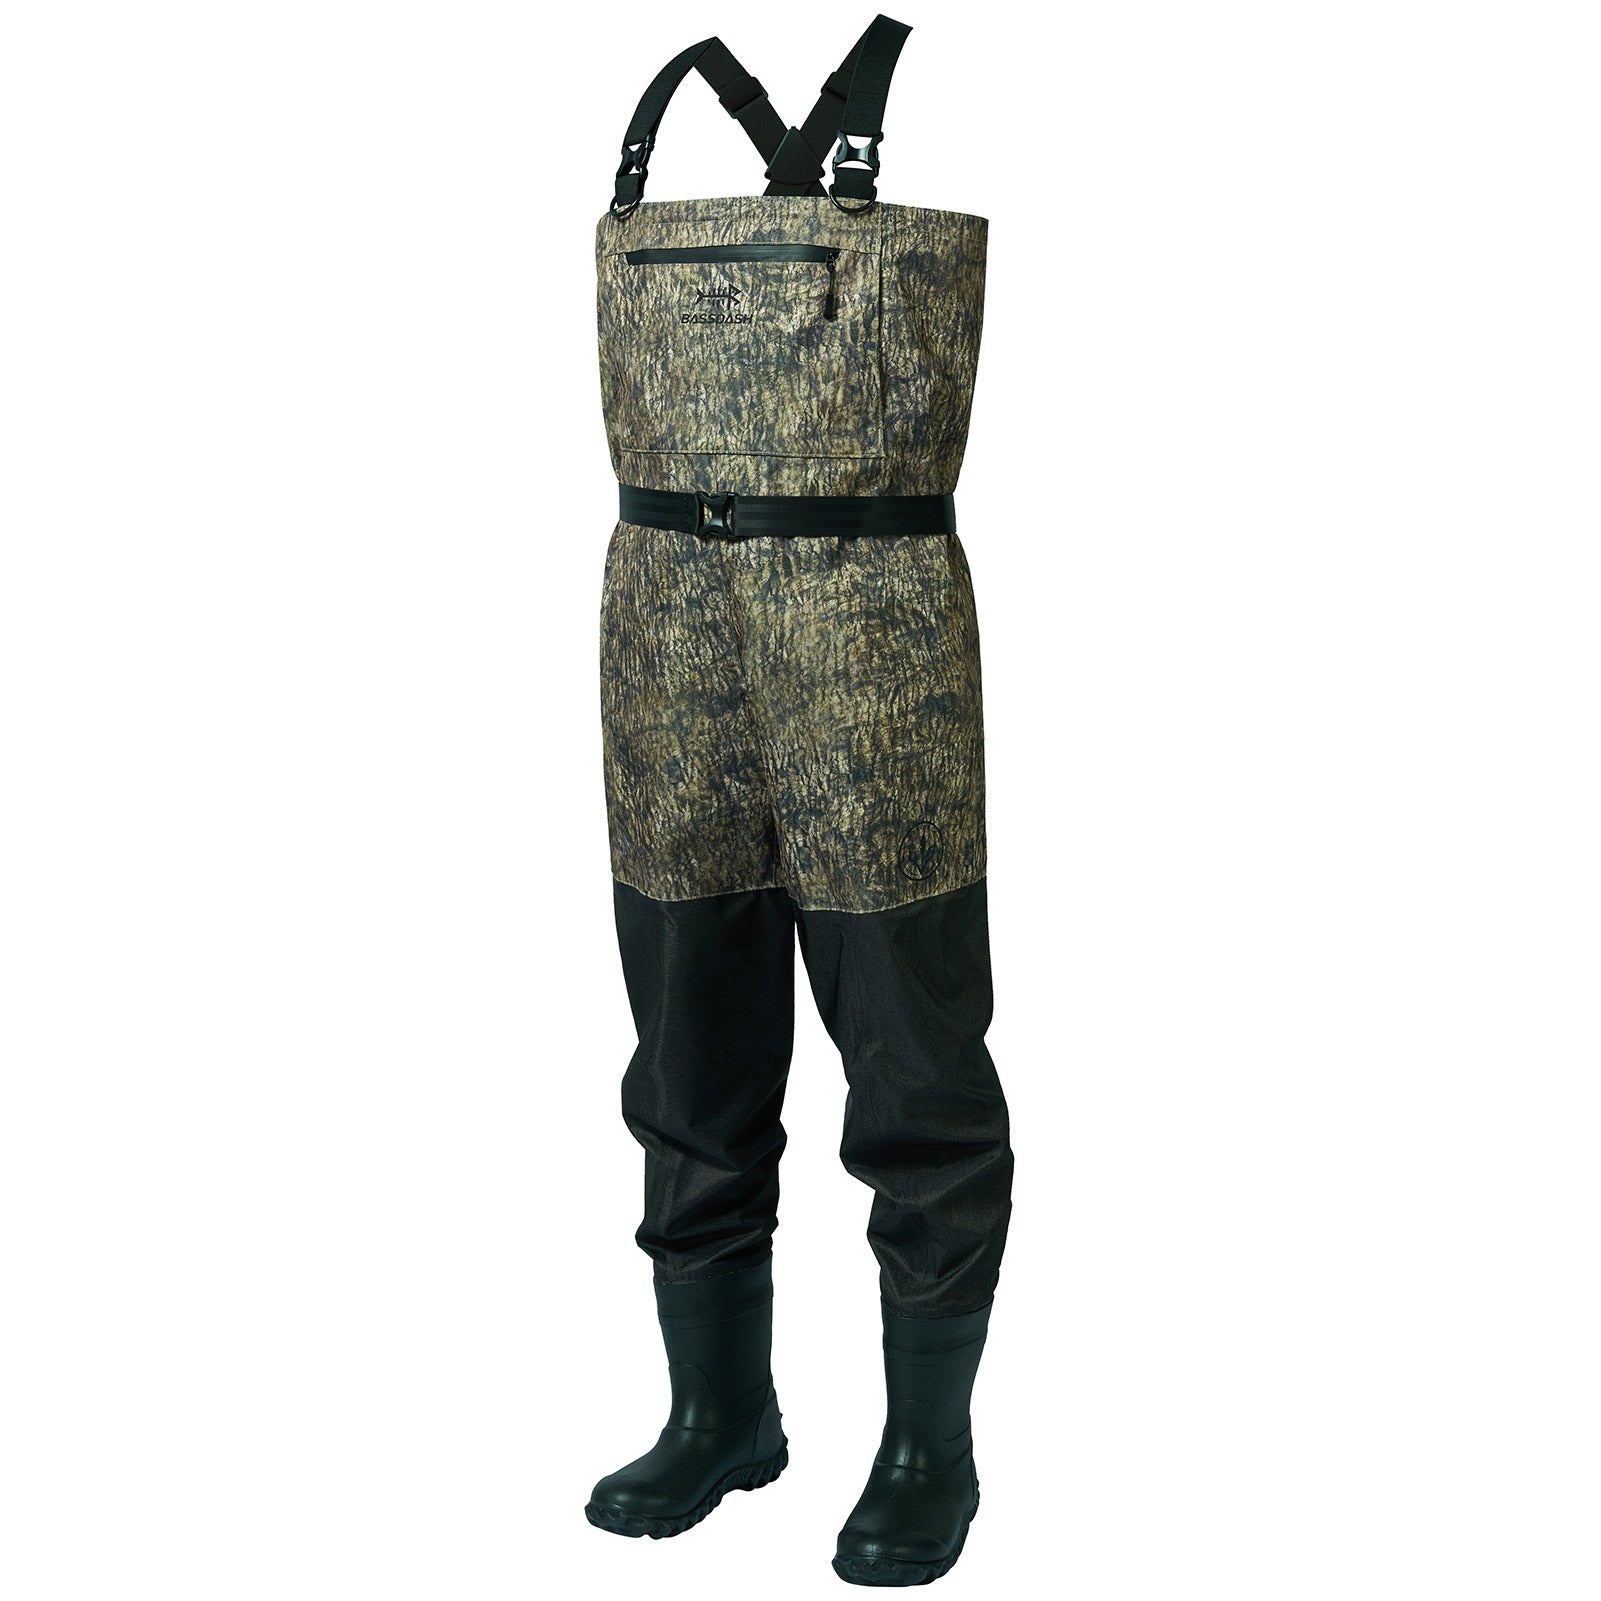 Men's IMMERSE Breathable Ripstop Wader - Boot Foot - Mossy Wood / Small 7-8